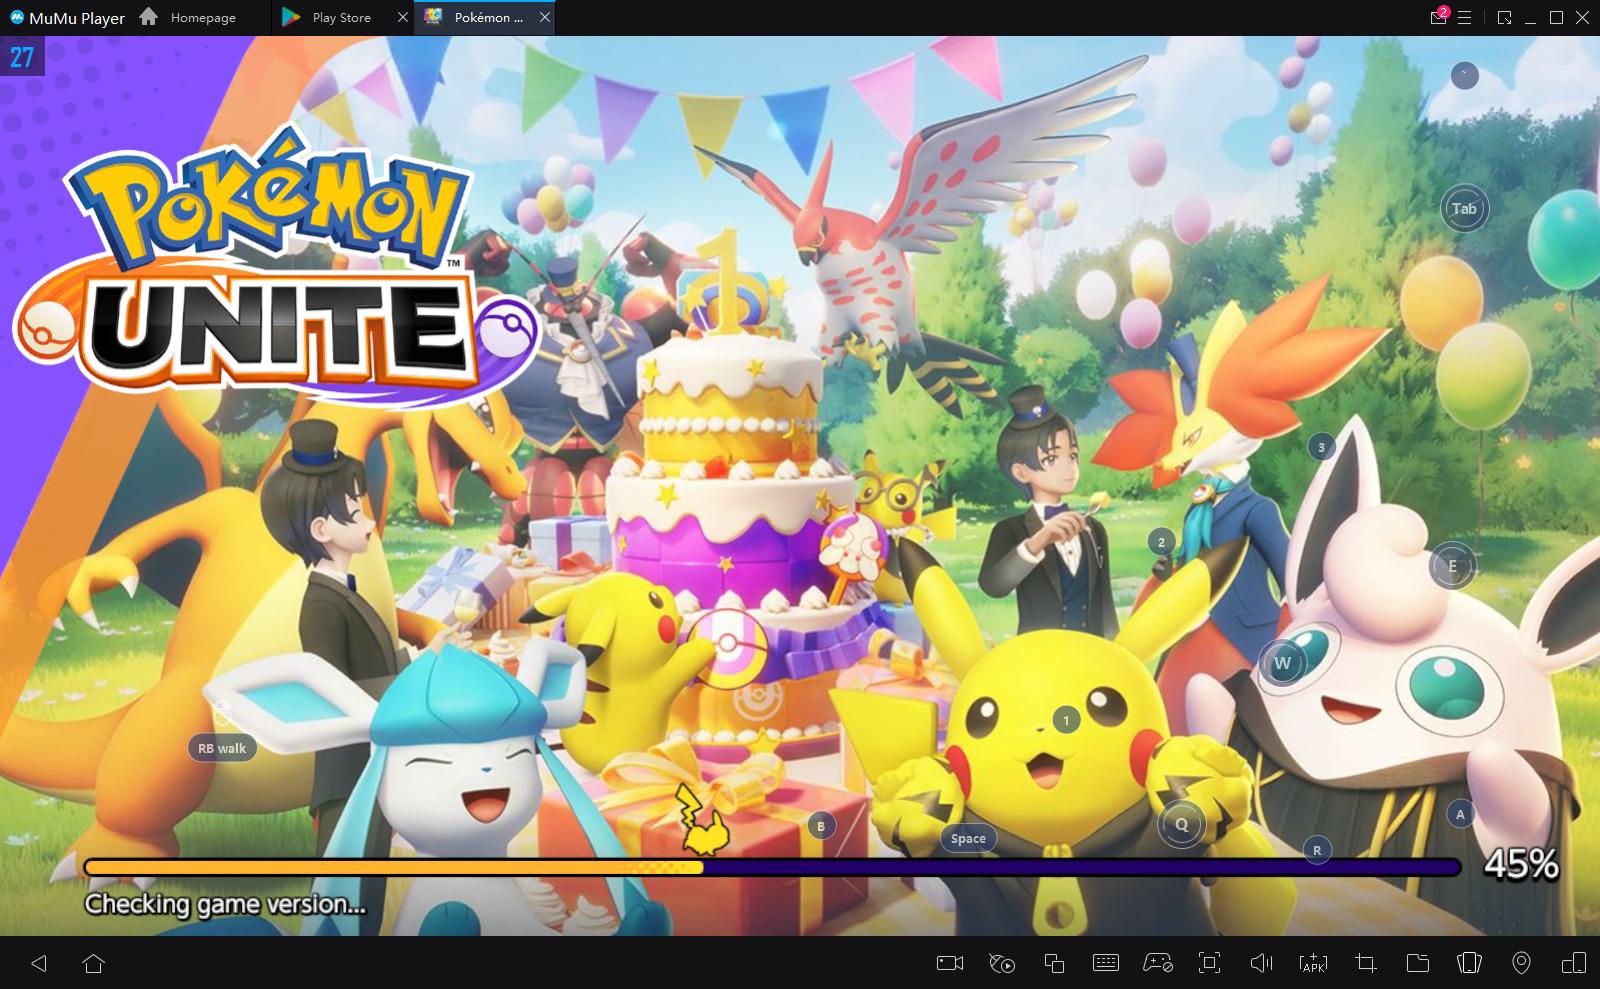 MuMu Player - 👏👏Pokémon Unite is officially launched now!